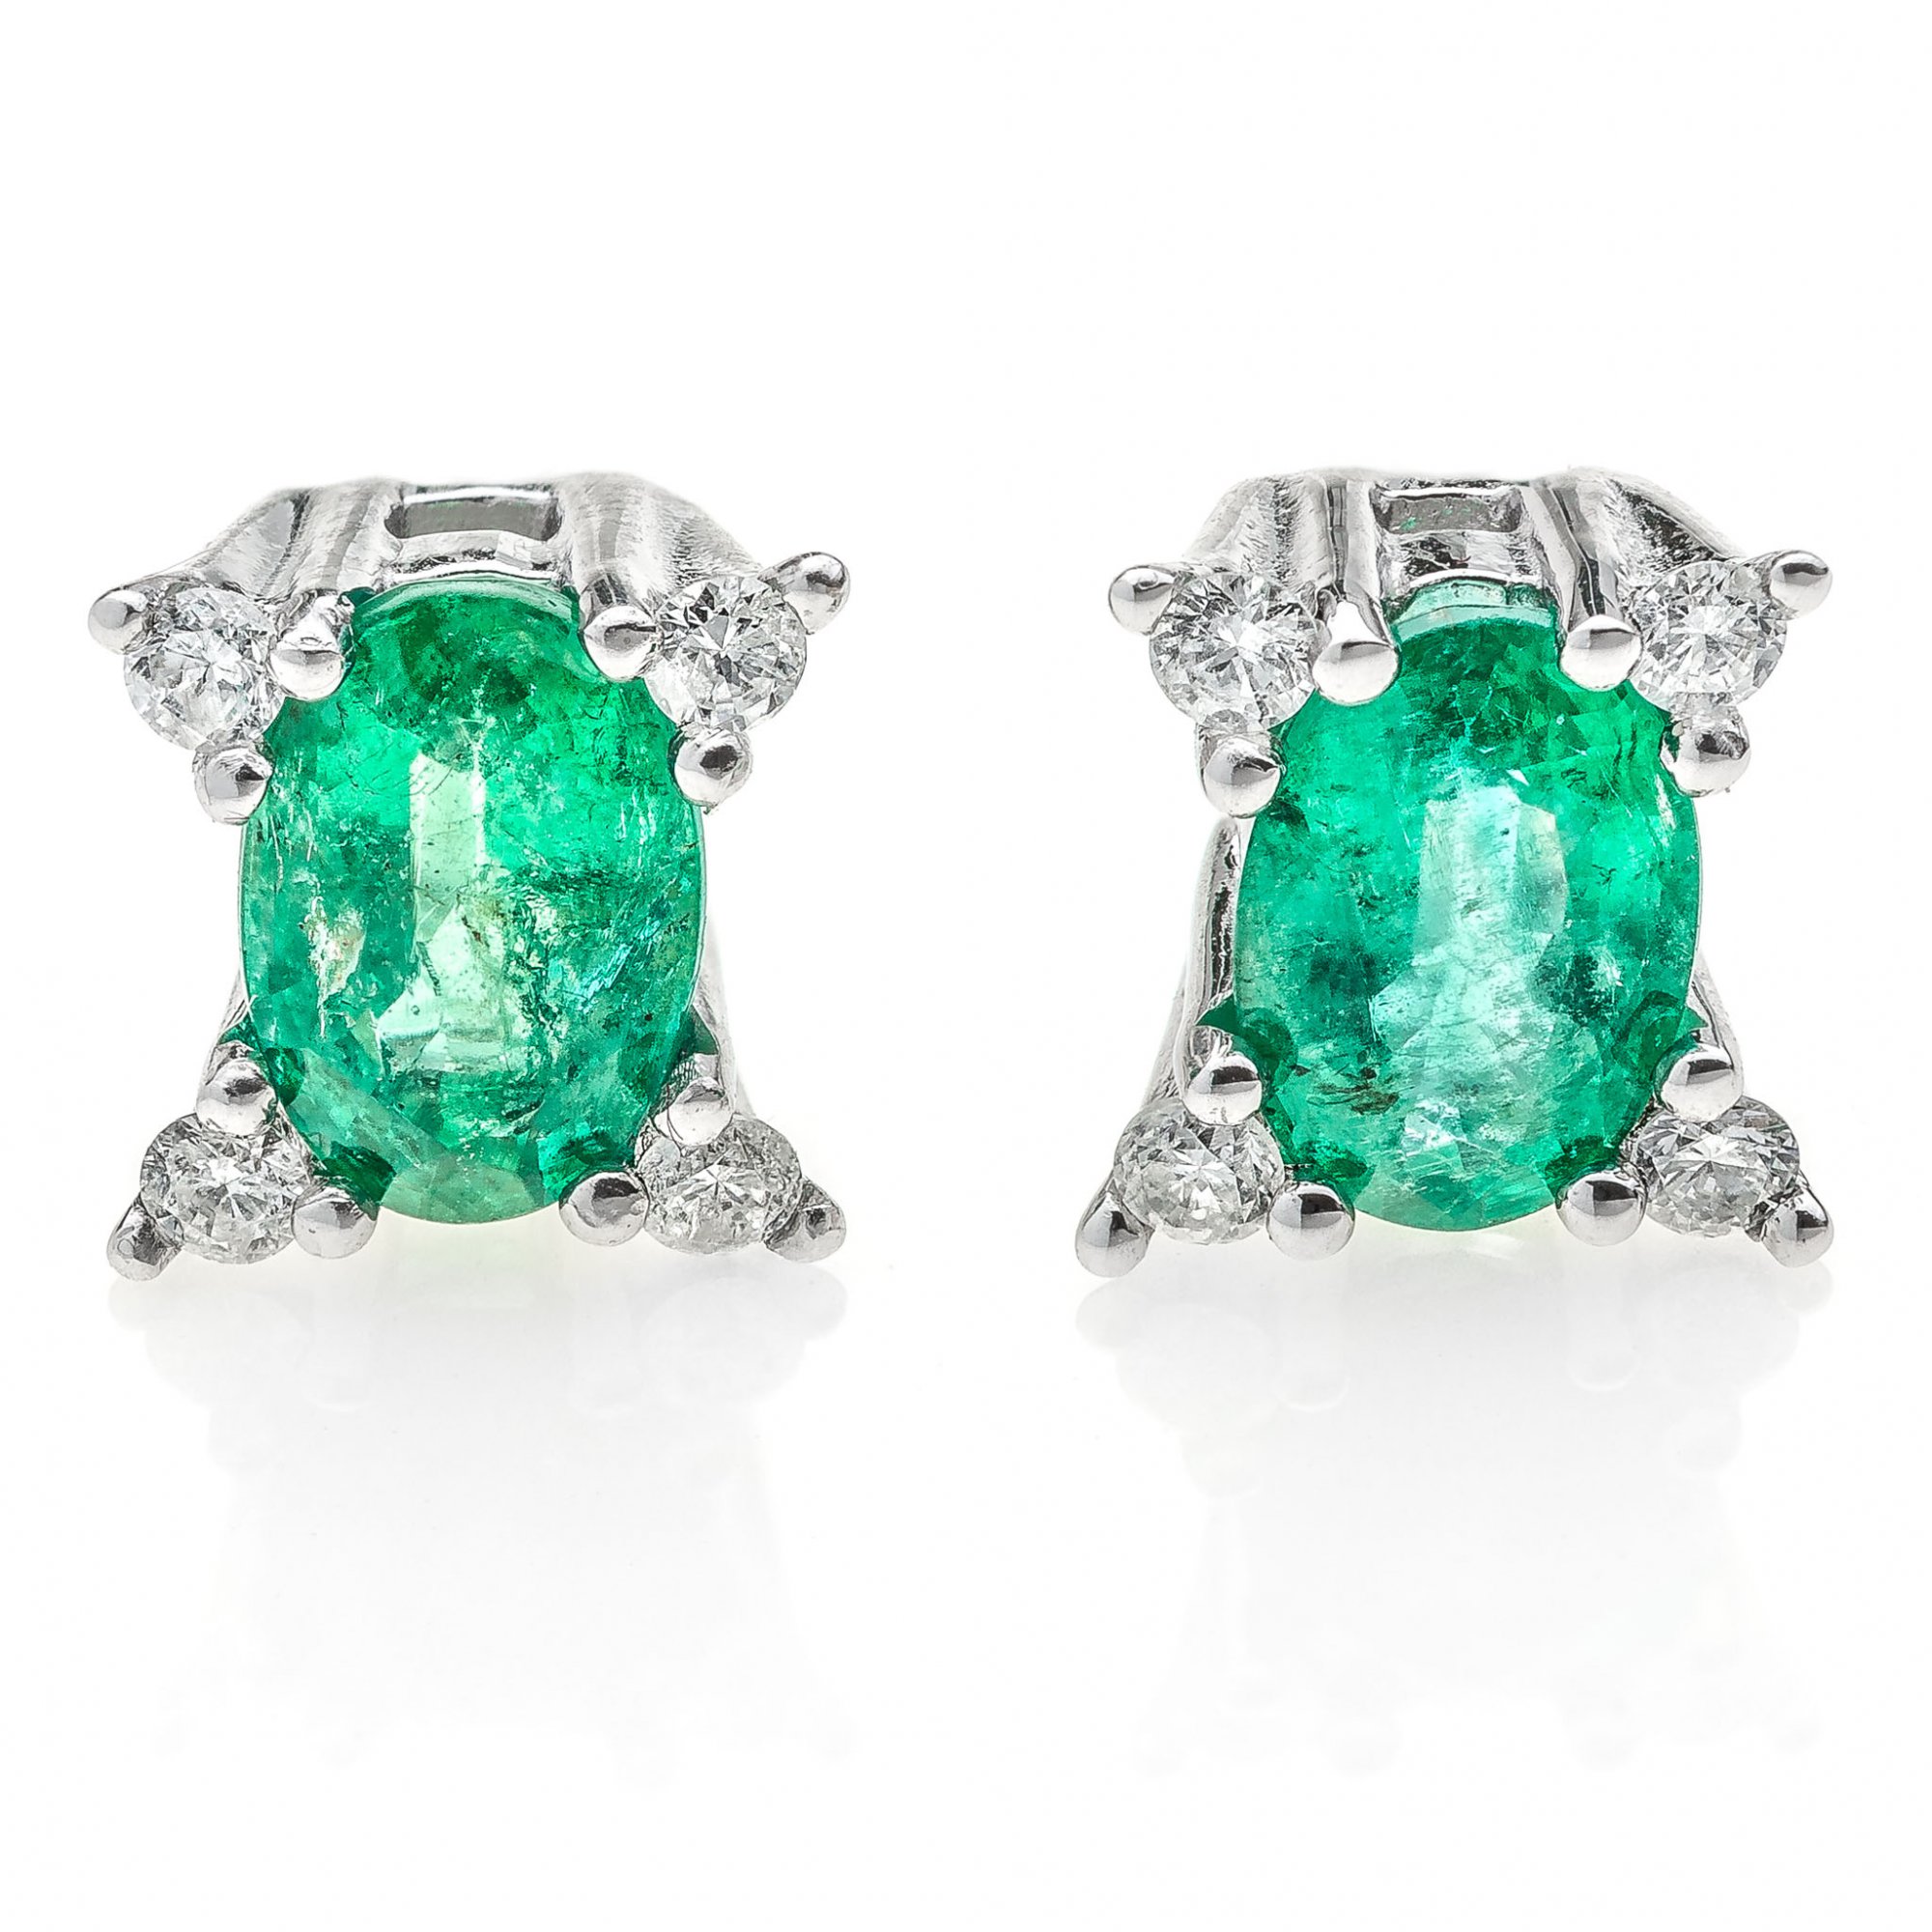 18 KT white gold earrings with natural Columbia emeralds and natural round brilliant cut diamonds